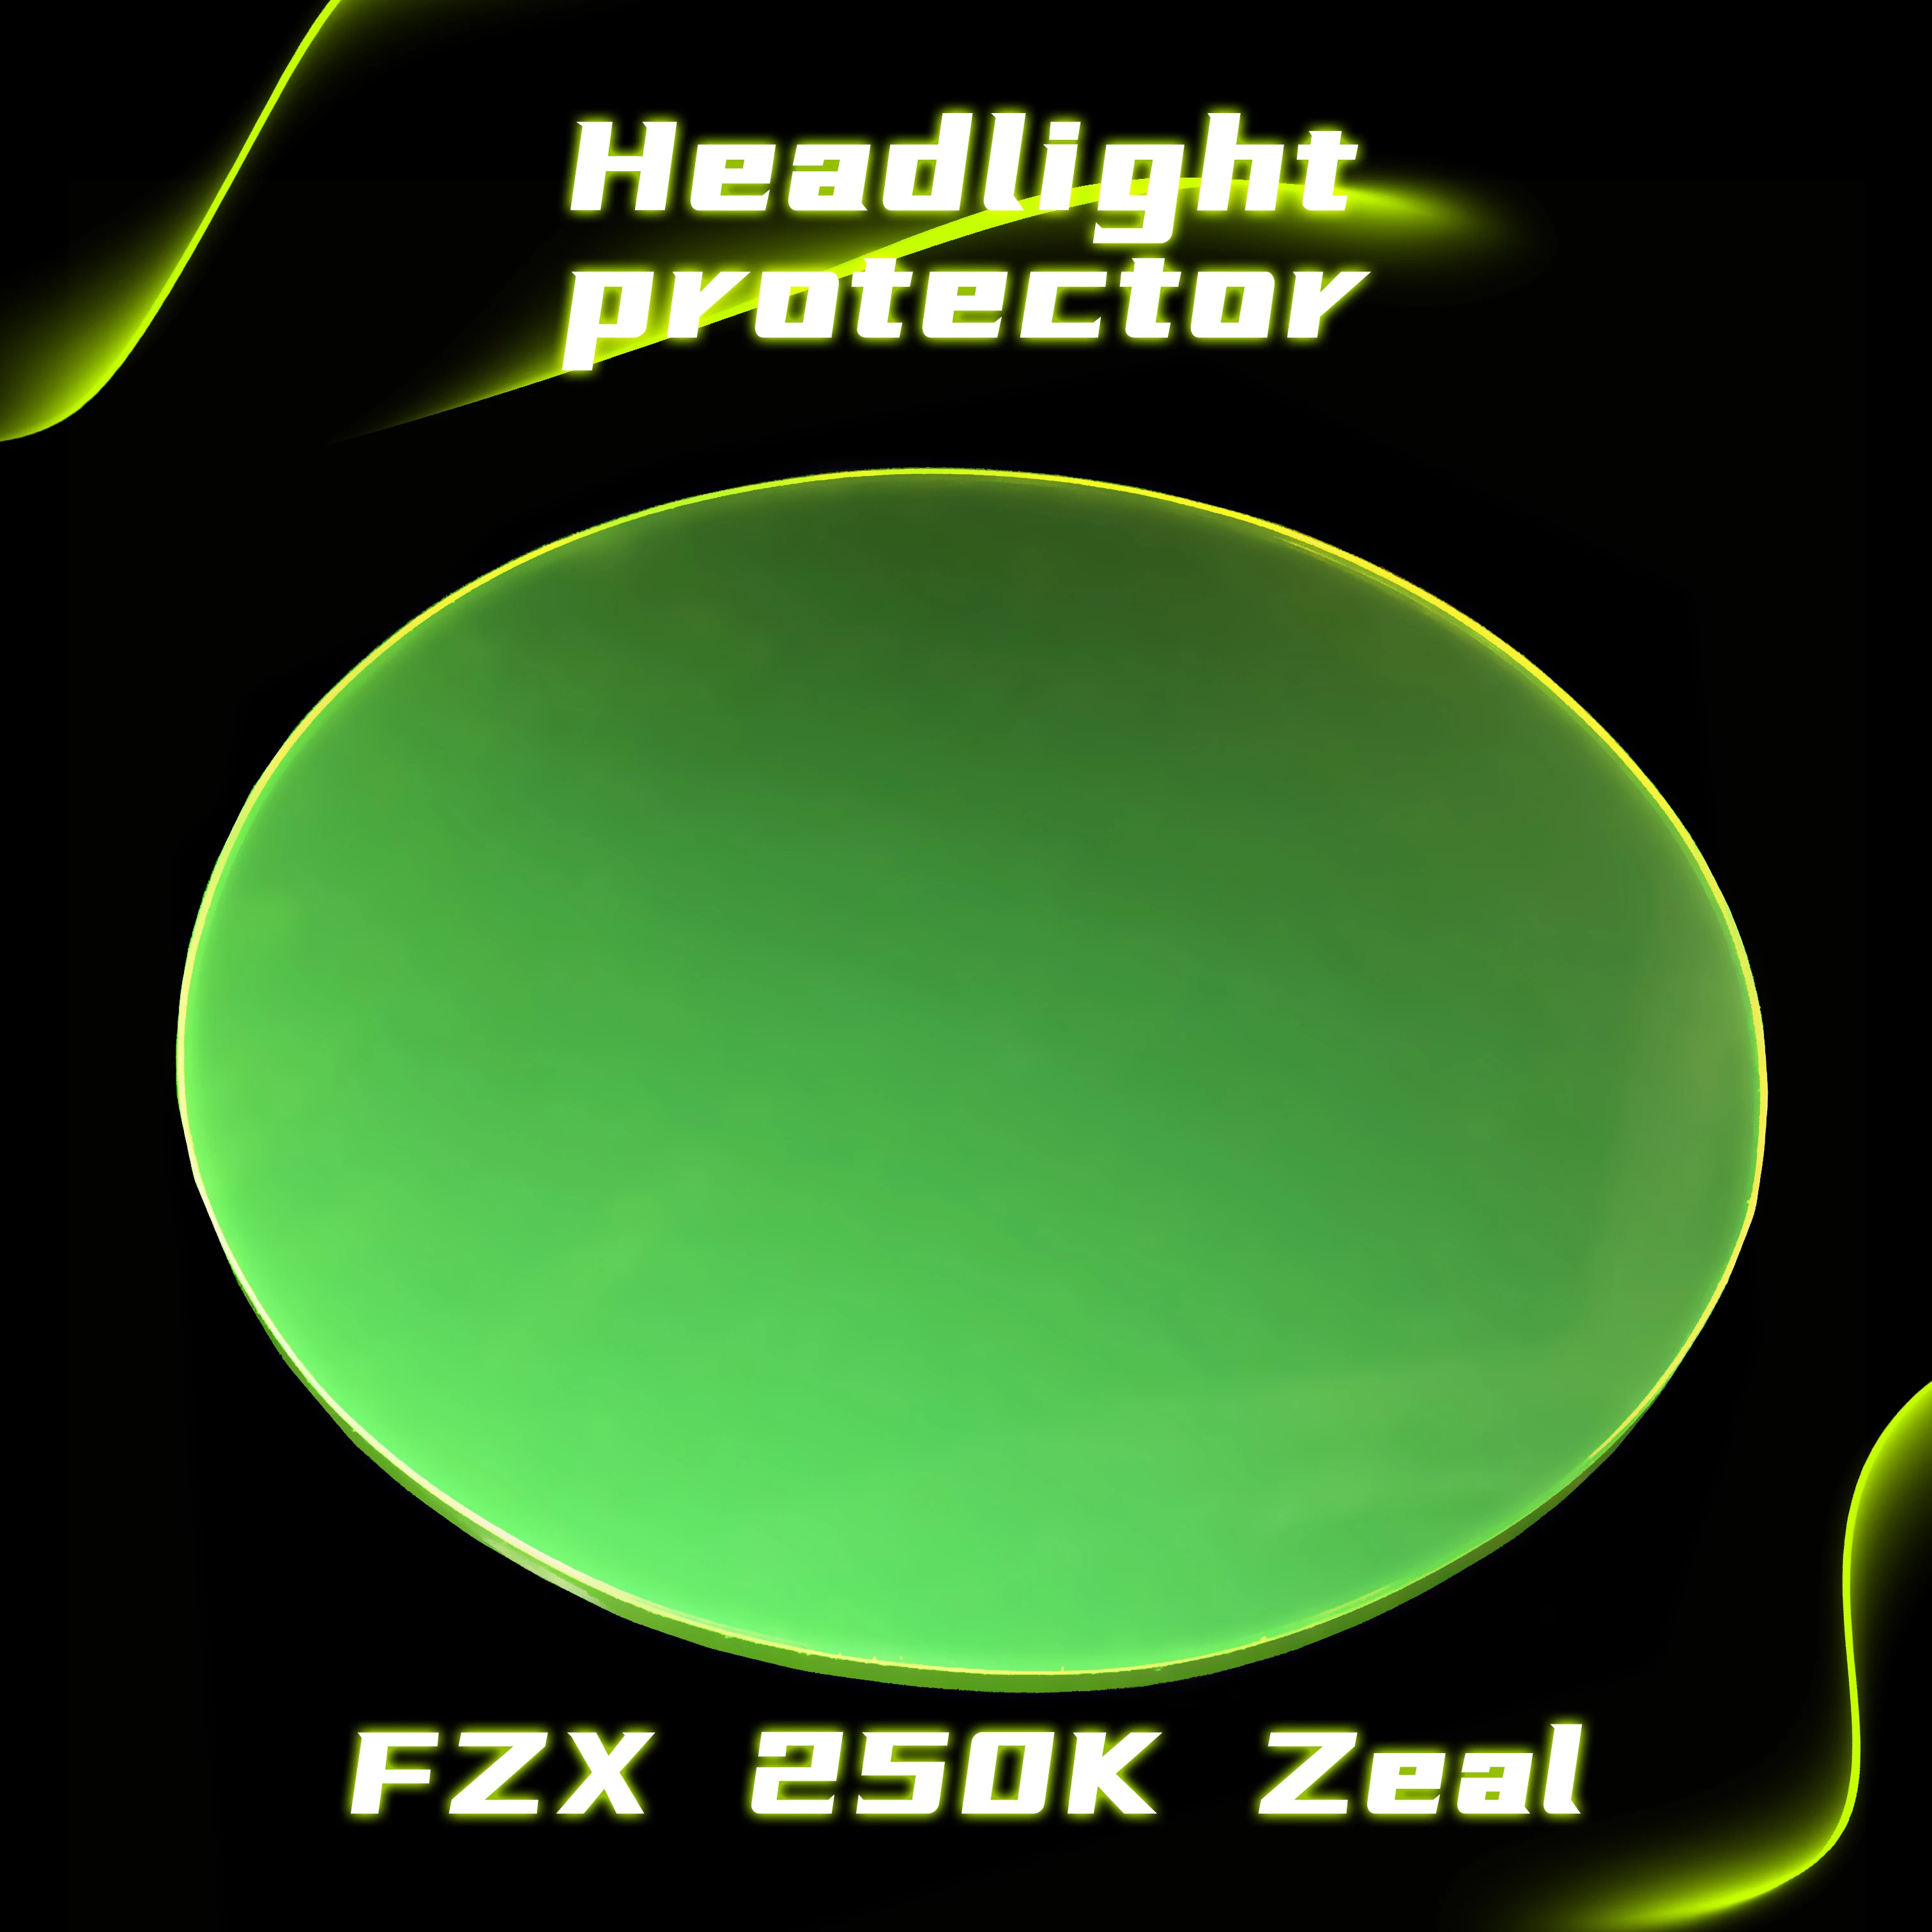 

For YAMAHA FZX 250K Zeal 1999 FZX250K ZEAL Motorcycle accessories Screen Lens Guard Acrylic Round Headlight Protector